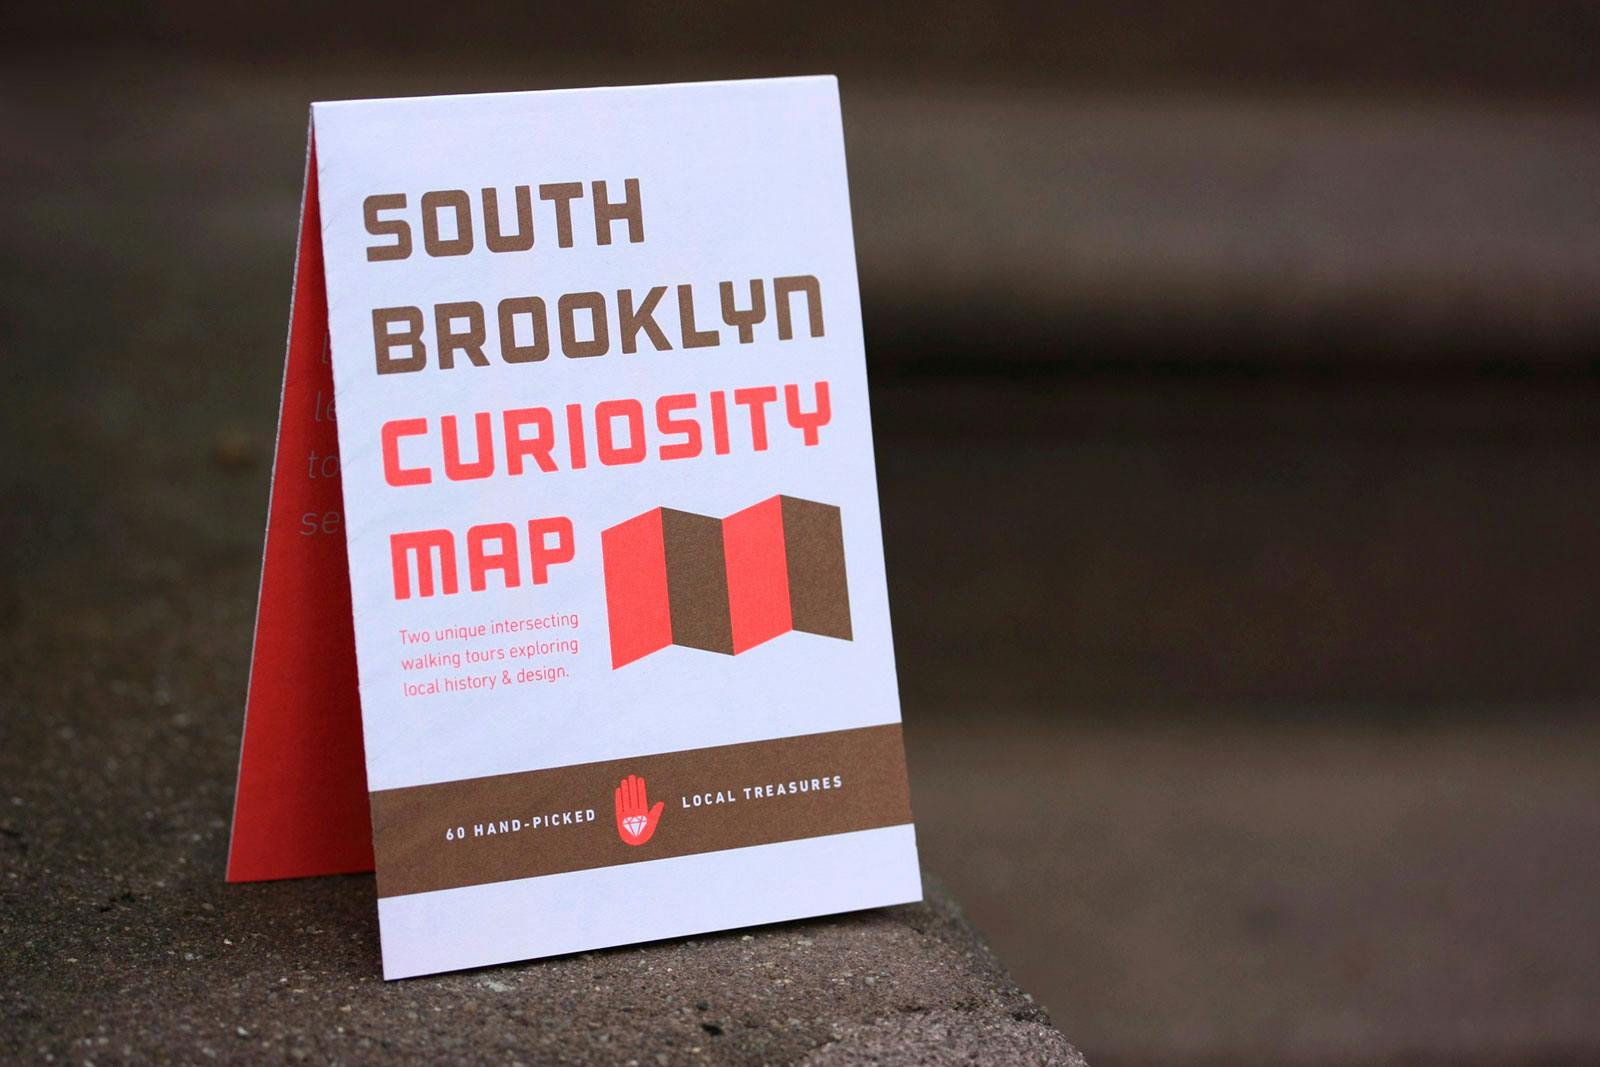 Photo of South Brooklyn Curiosity Map on concrete